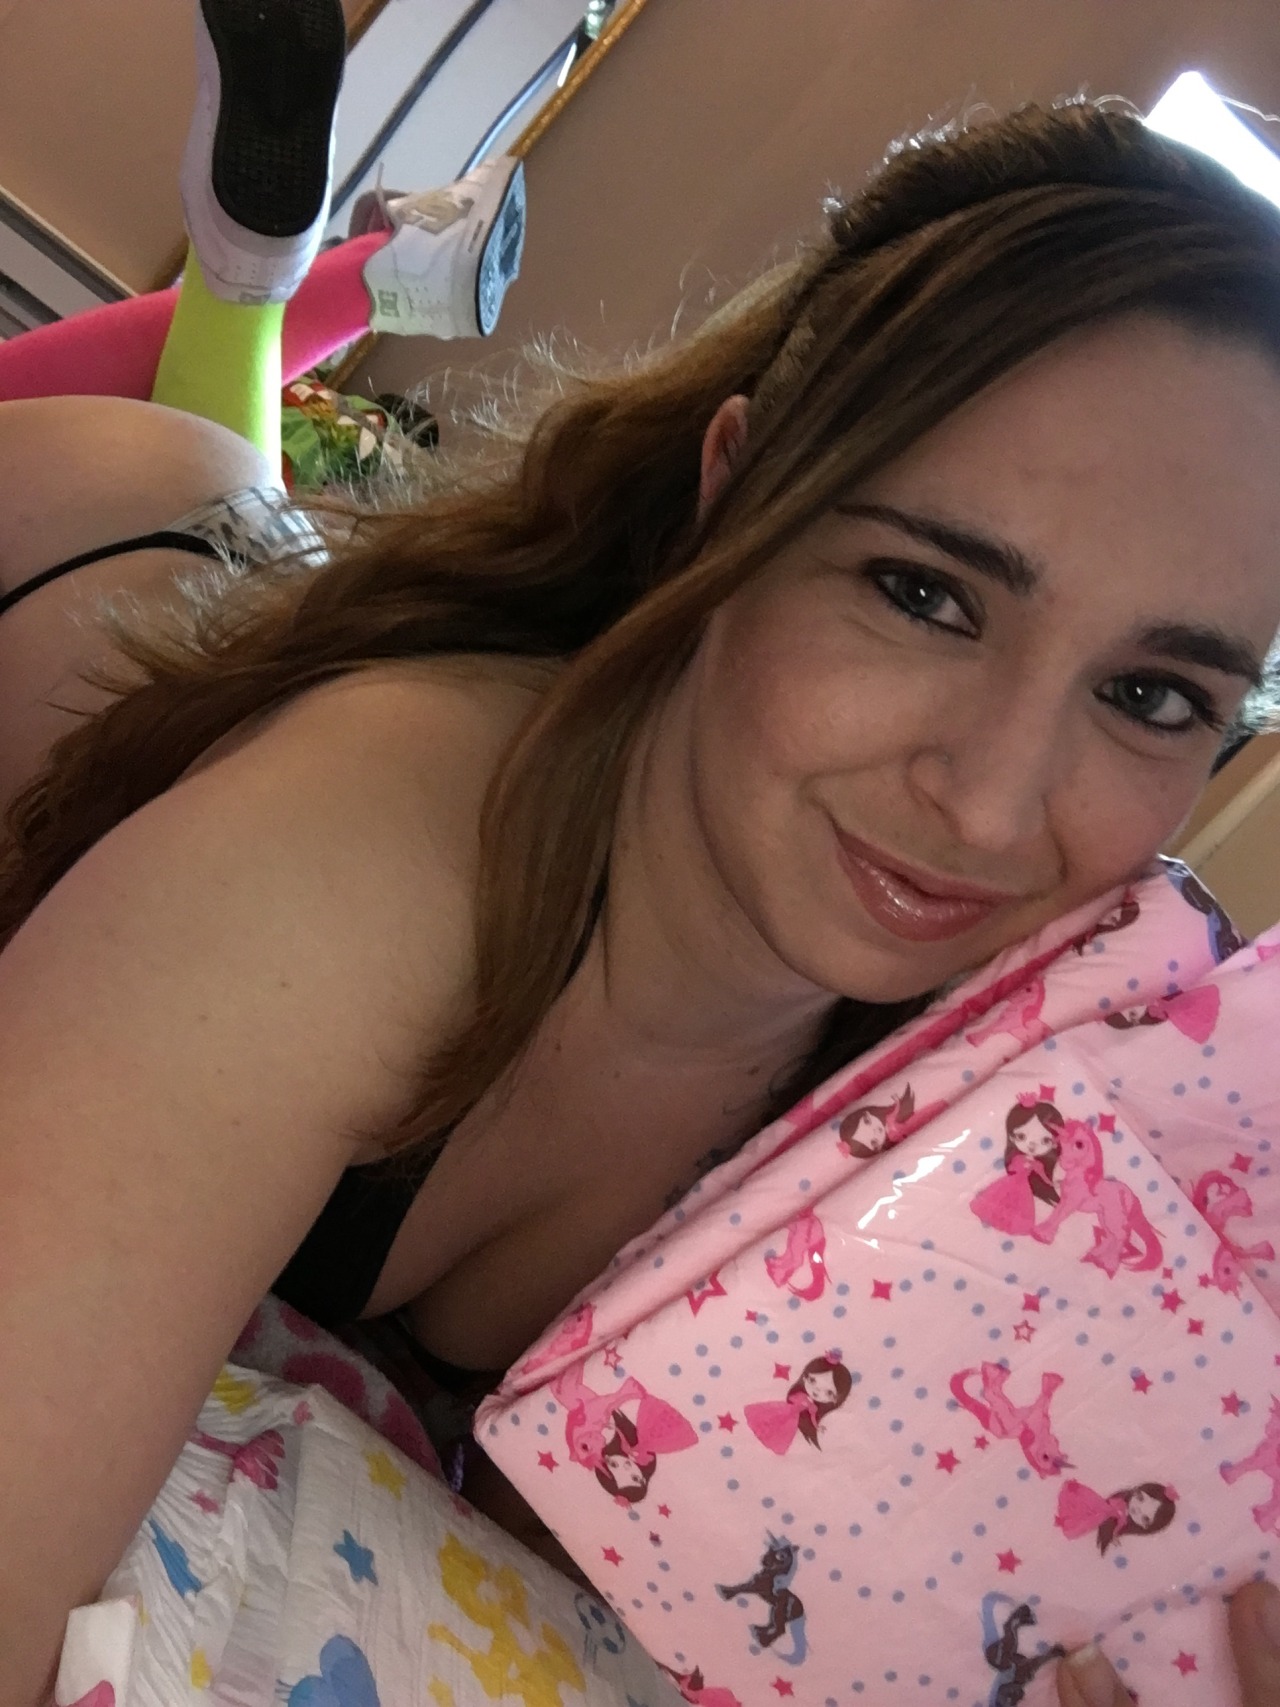 badlilblubunny:  Come here baby, I have these adorable new diapers for you to try